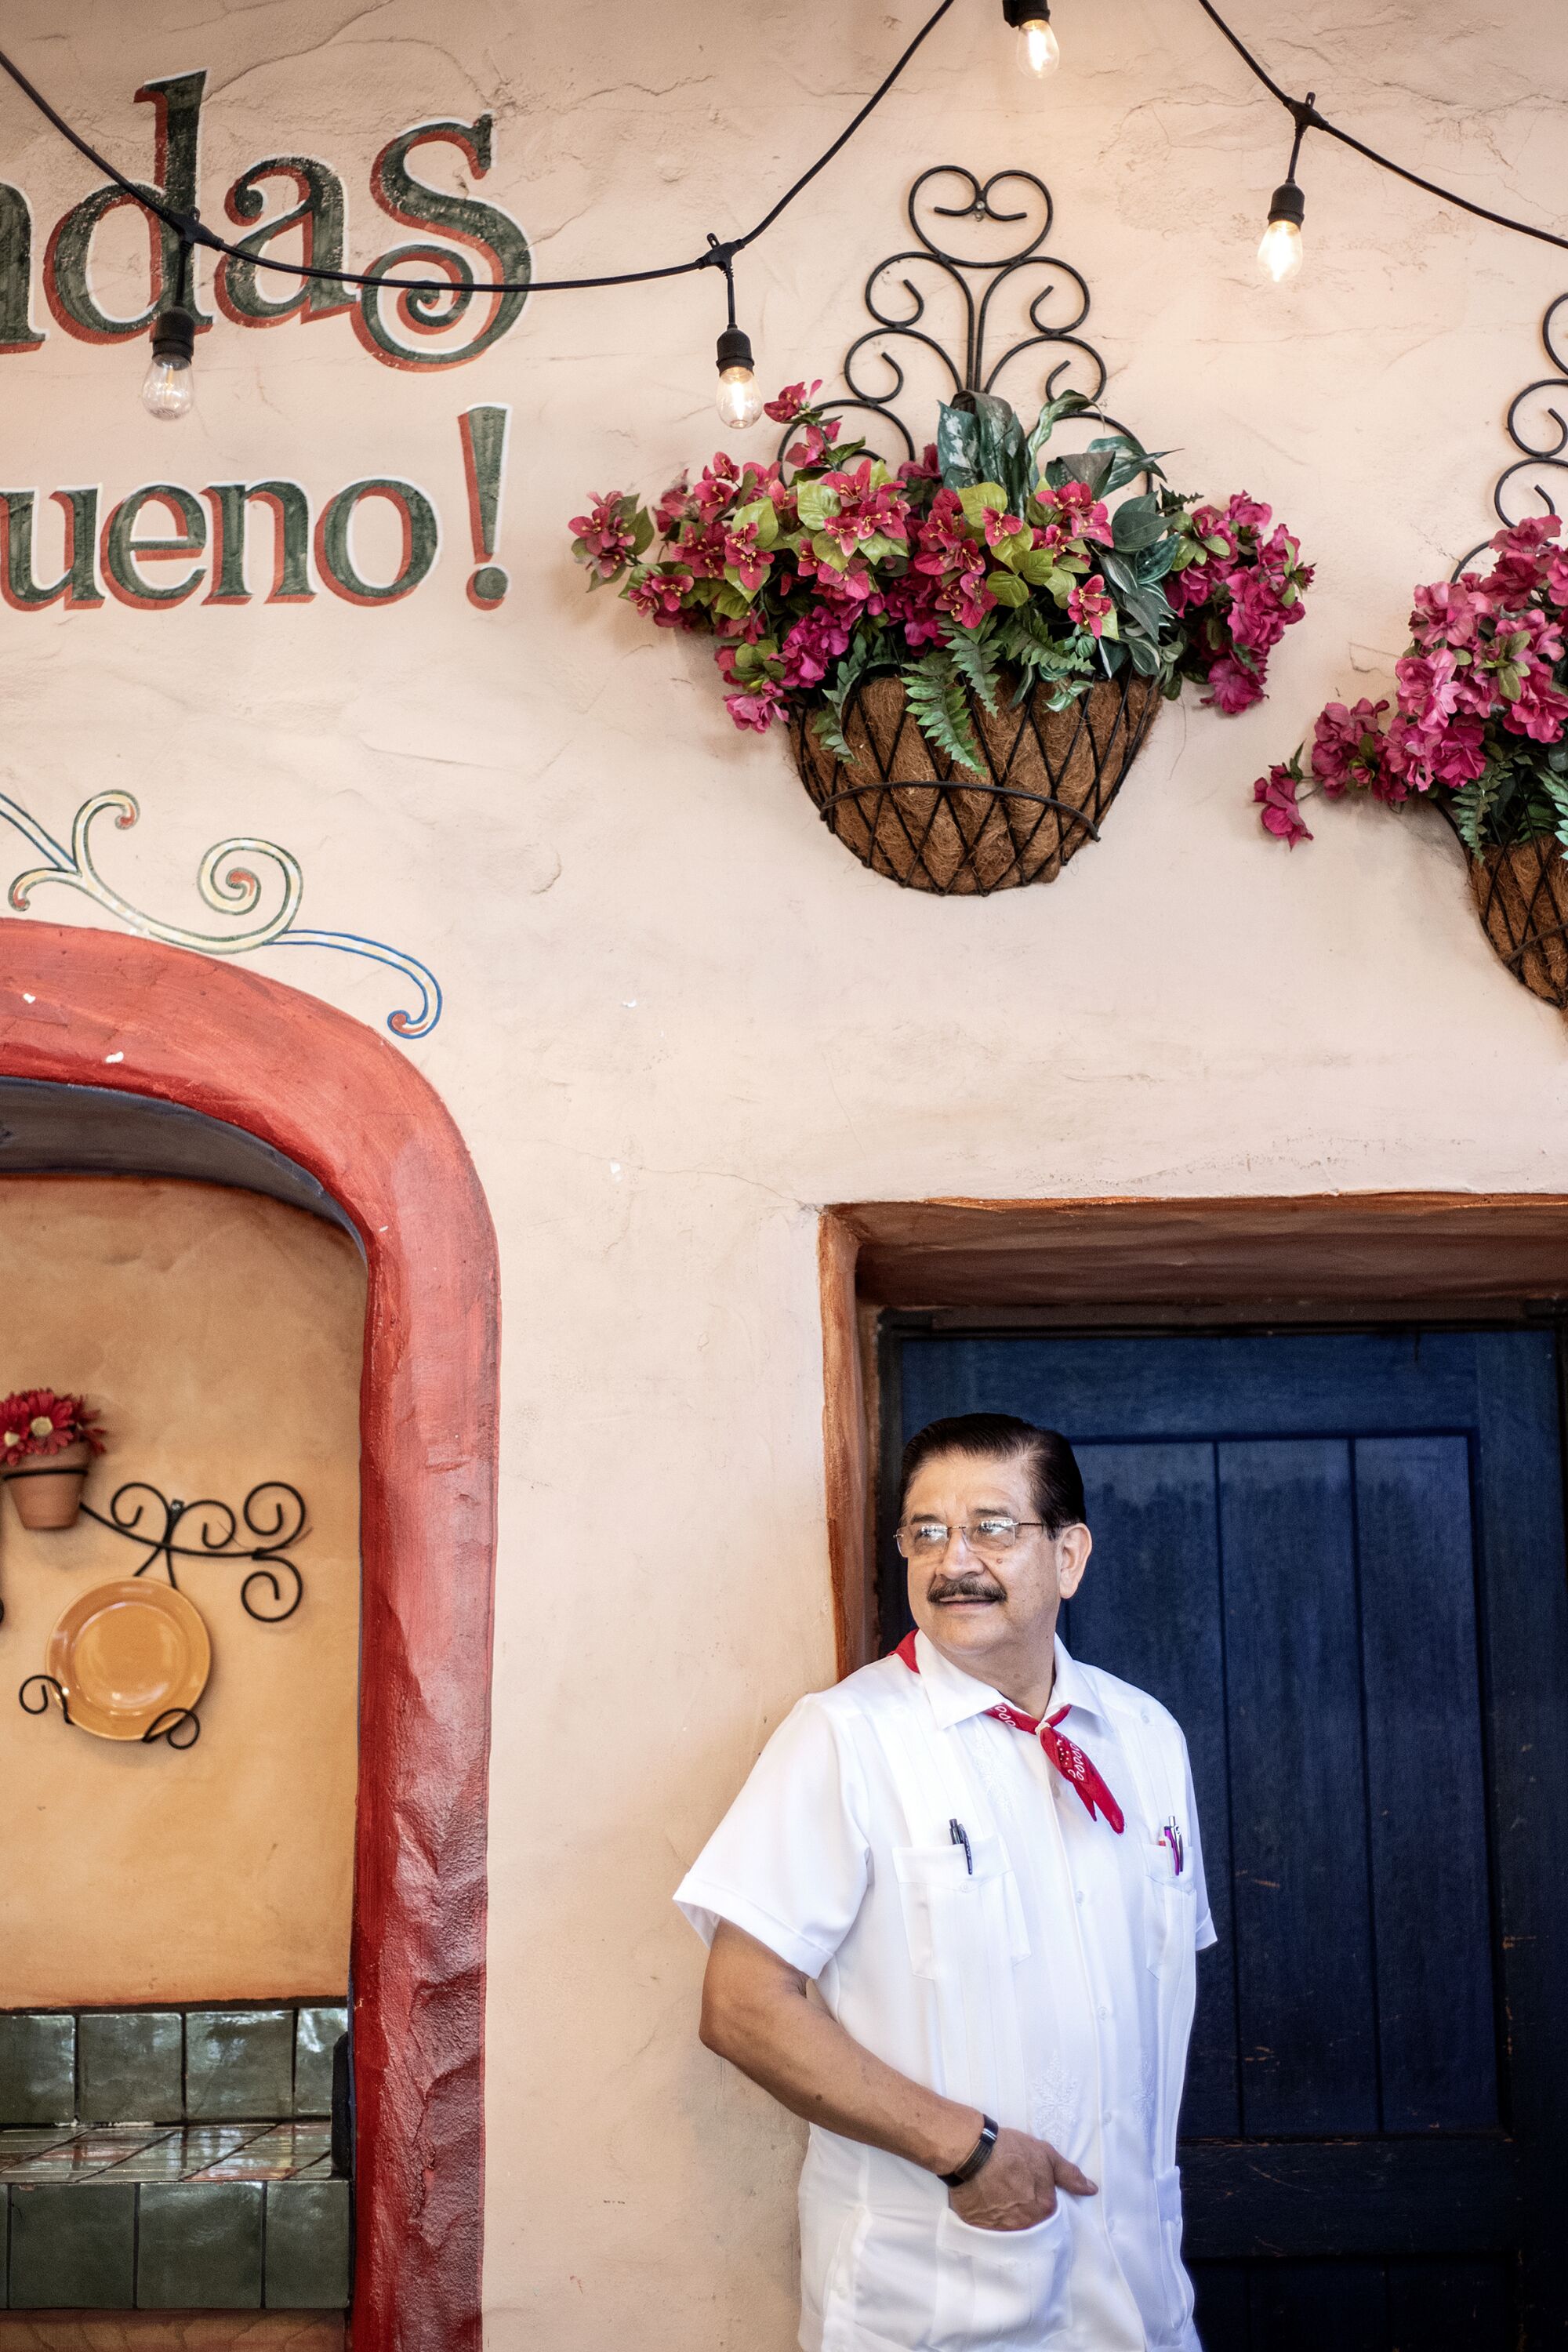 Justino Romero leaning against a wall at El Cholo restaurant.